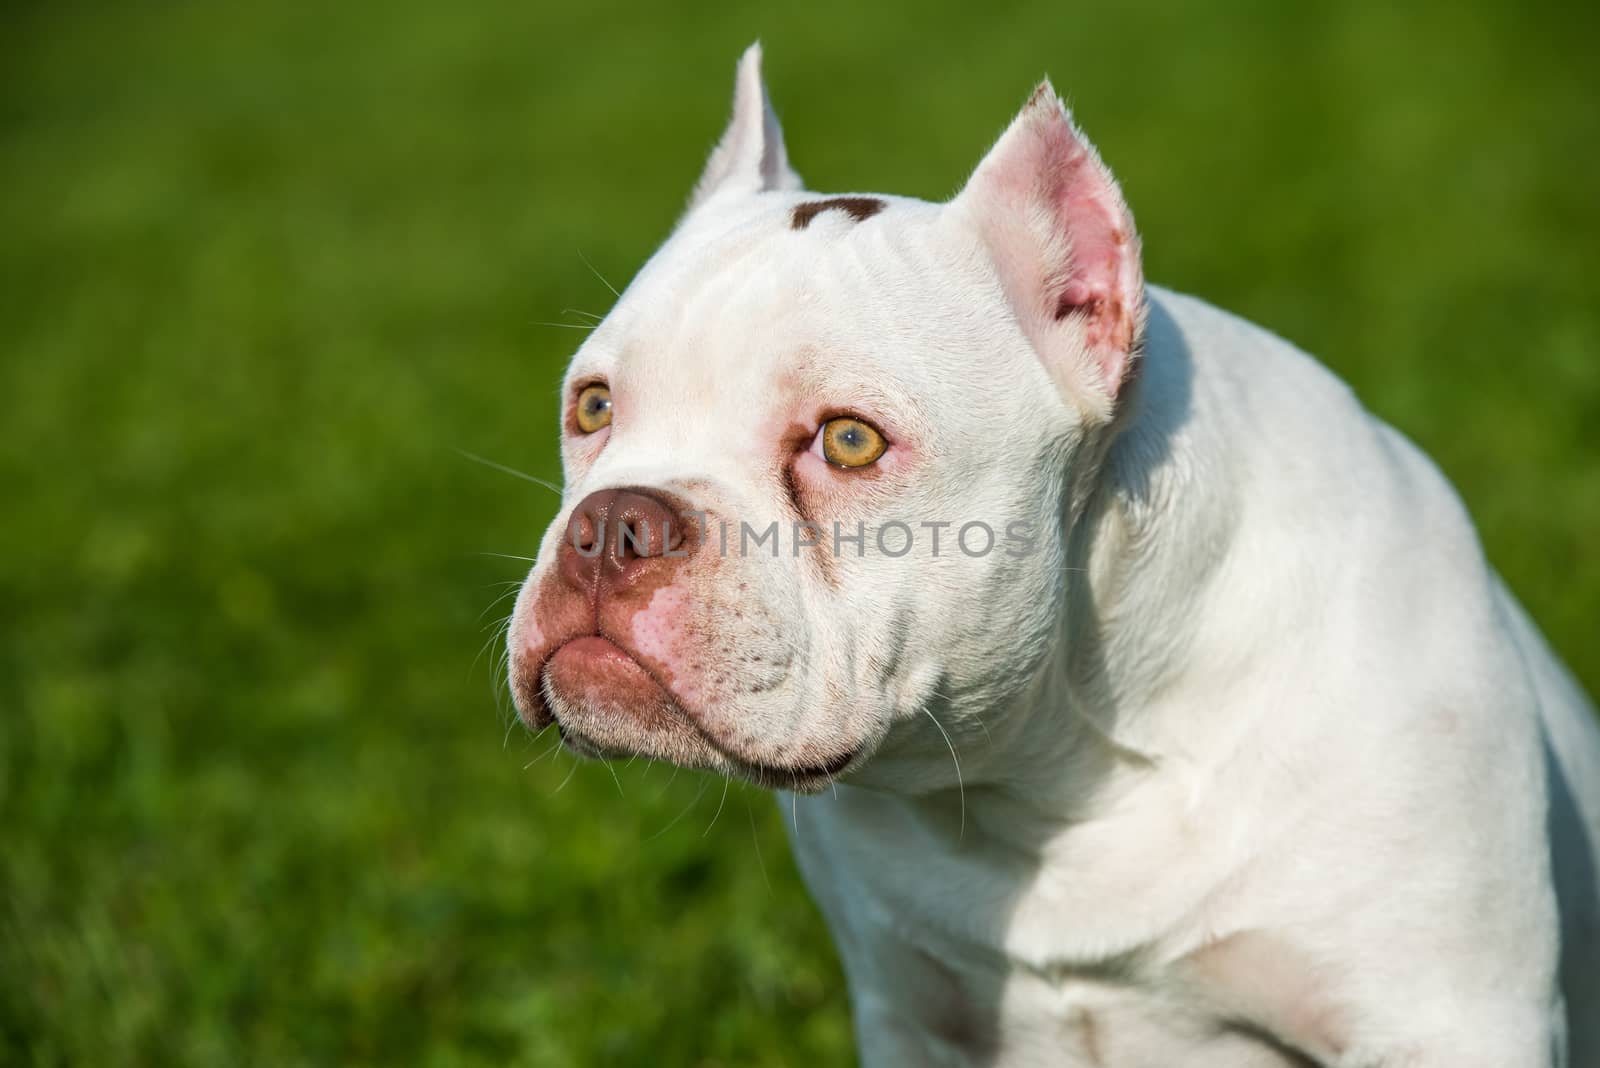 White American Bully puppy dog sitting on green grass. Medium sized dog with a compact bulky muscular body, blocky head and heavy bone structure.